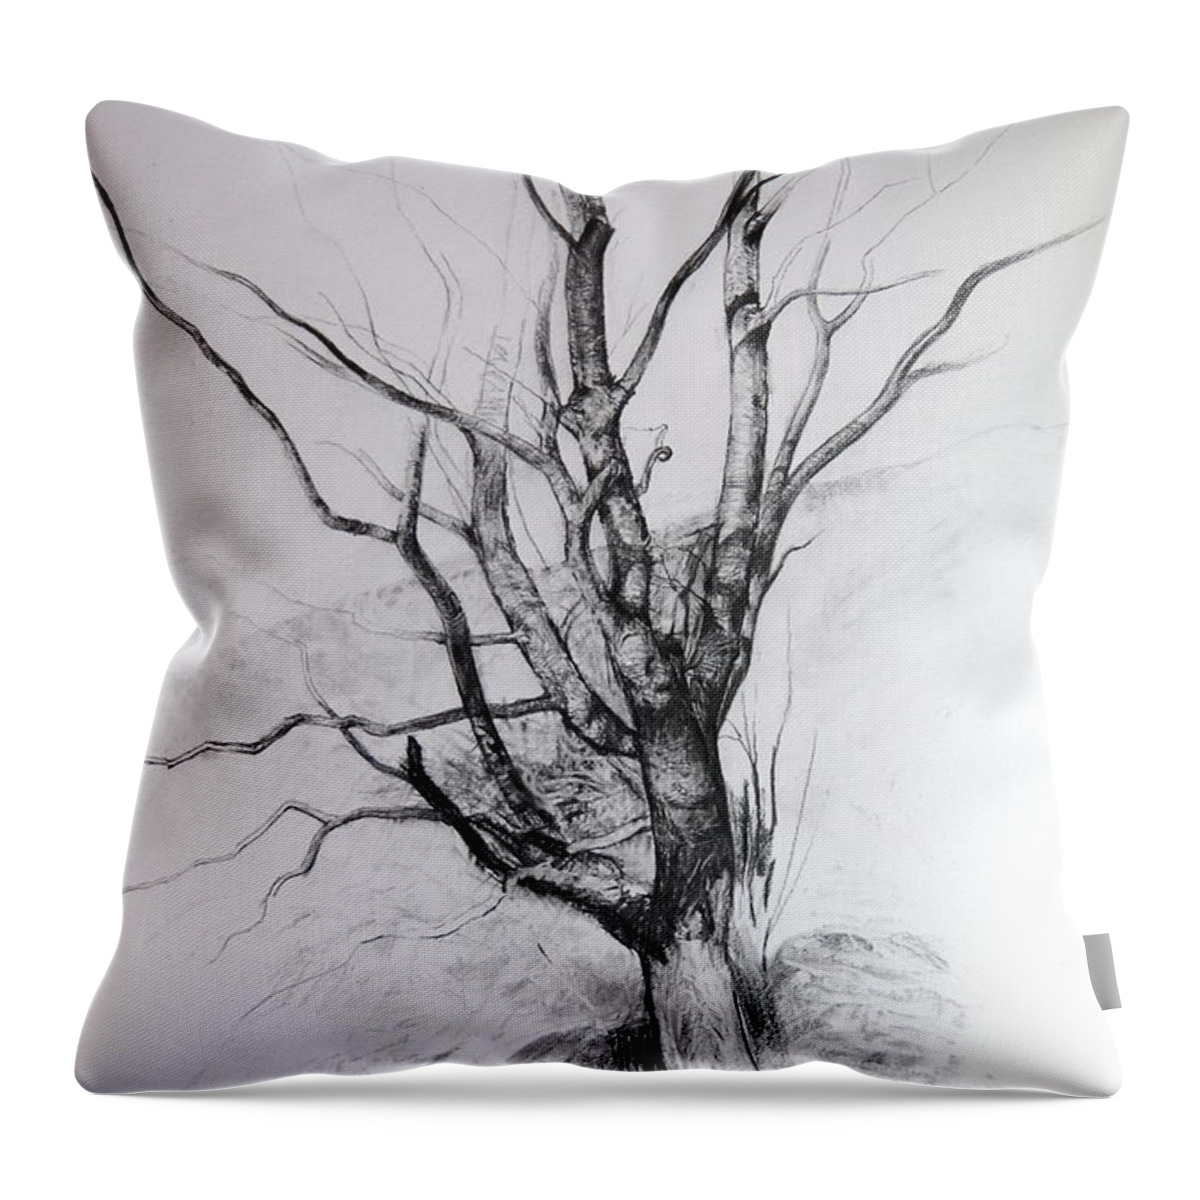 Landscape Throw Pillow featuring the drawing Study of a Tree by Harry Robertson